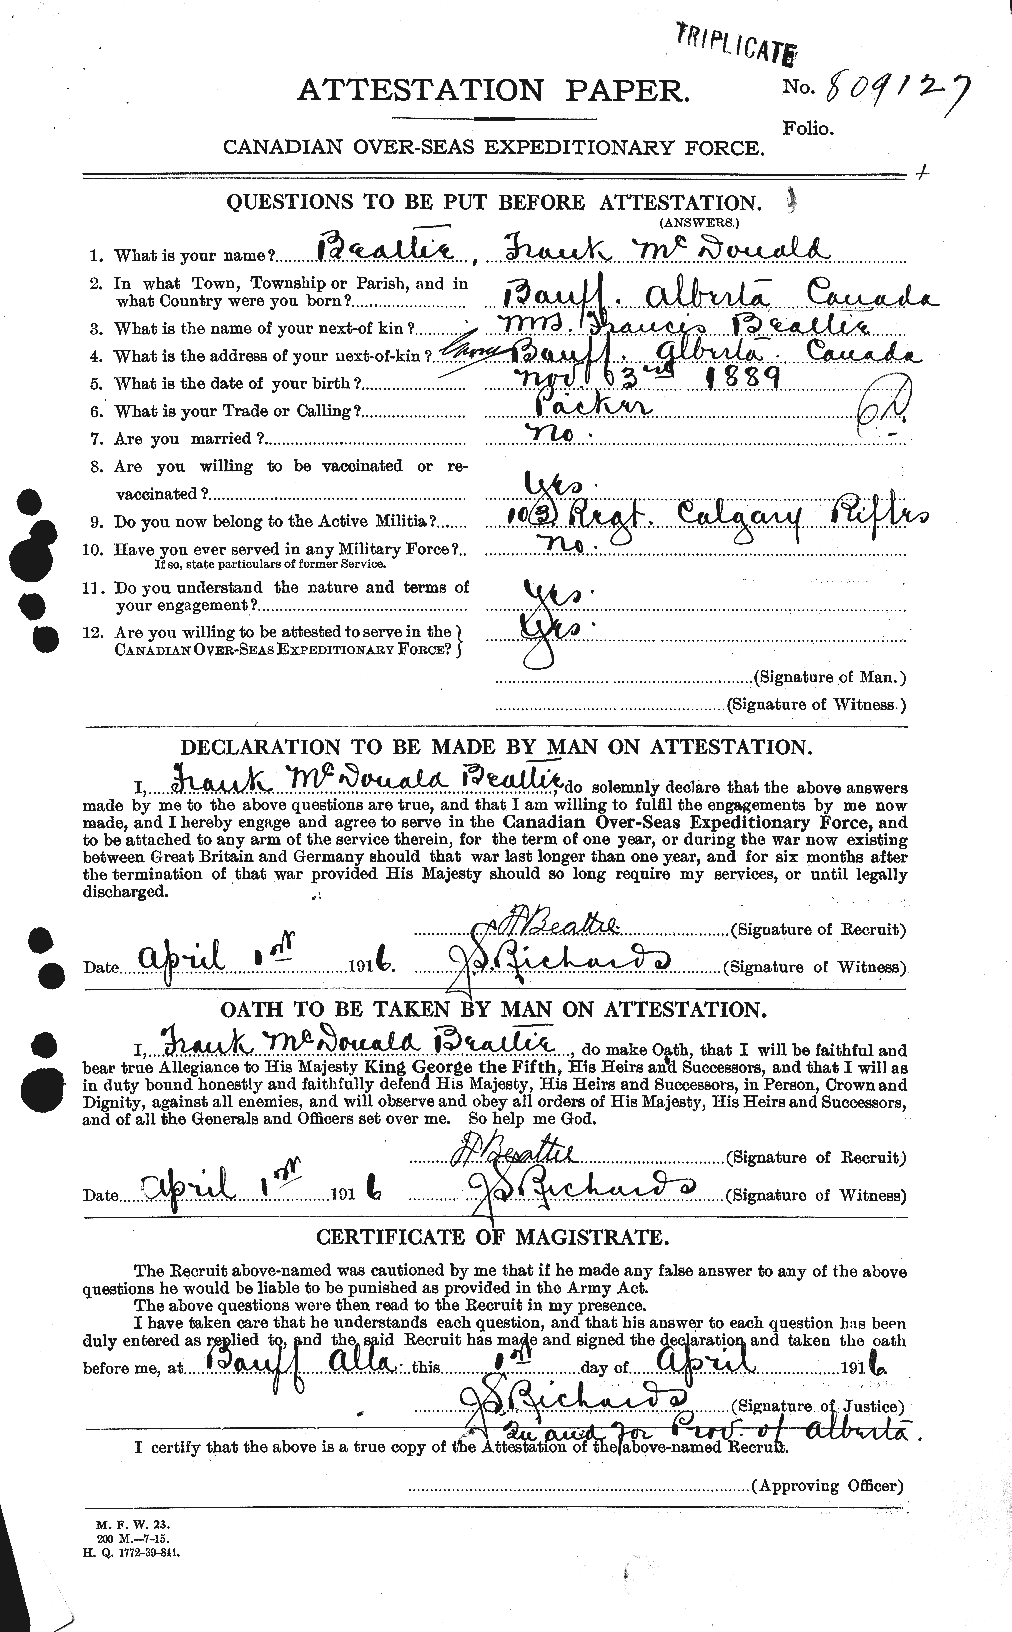 Personnel Records of the First World War - CEF 230684a